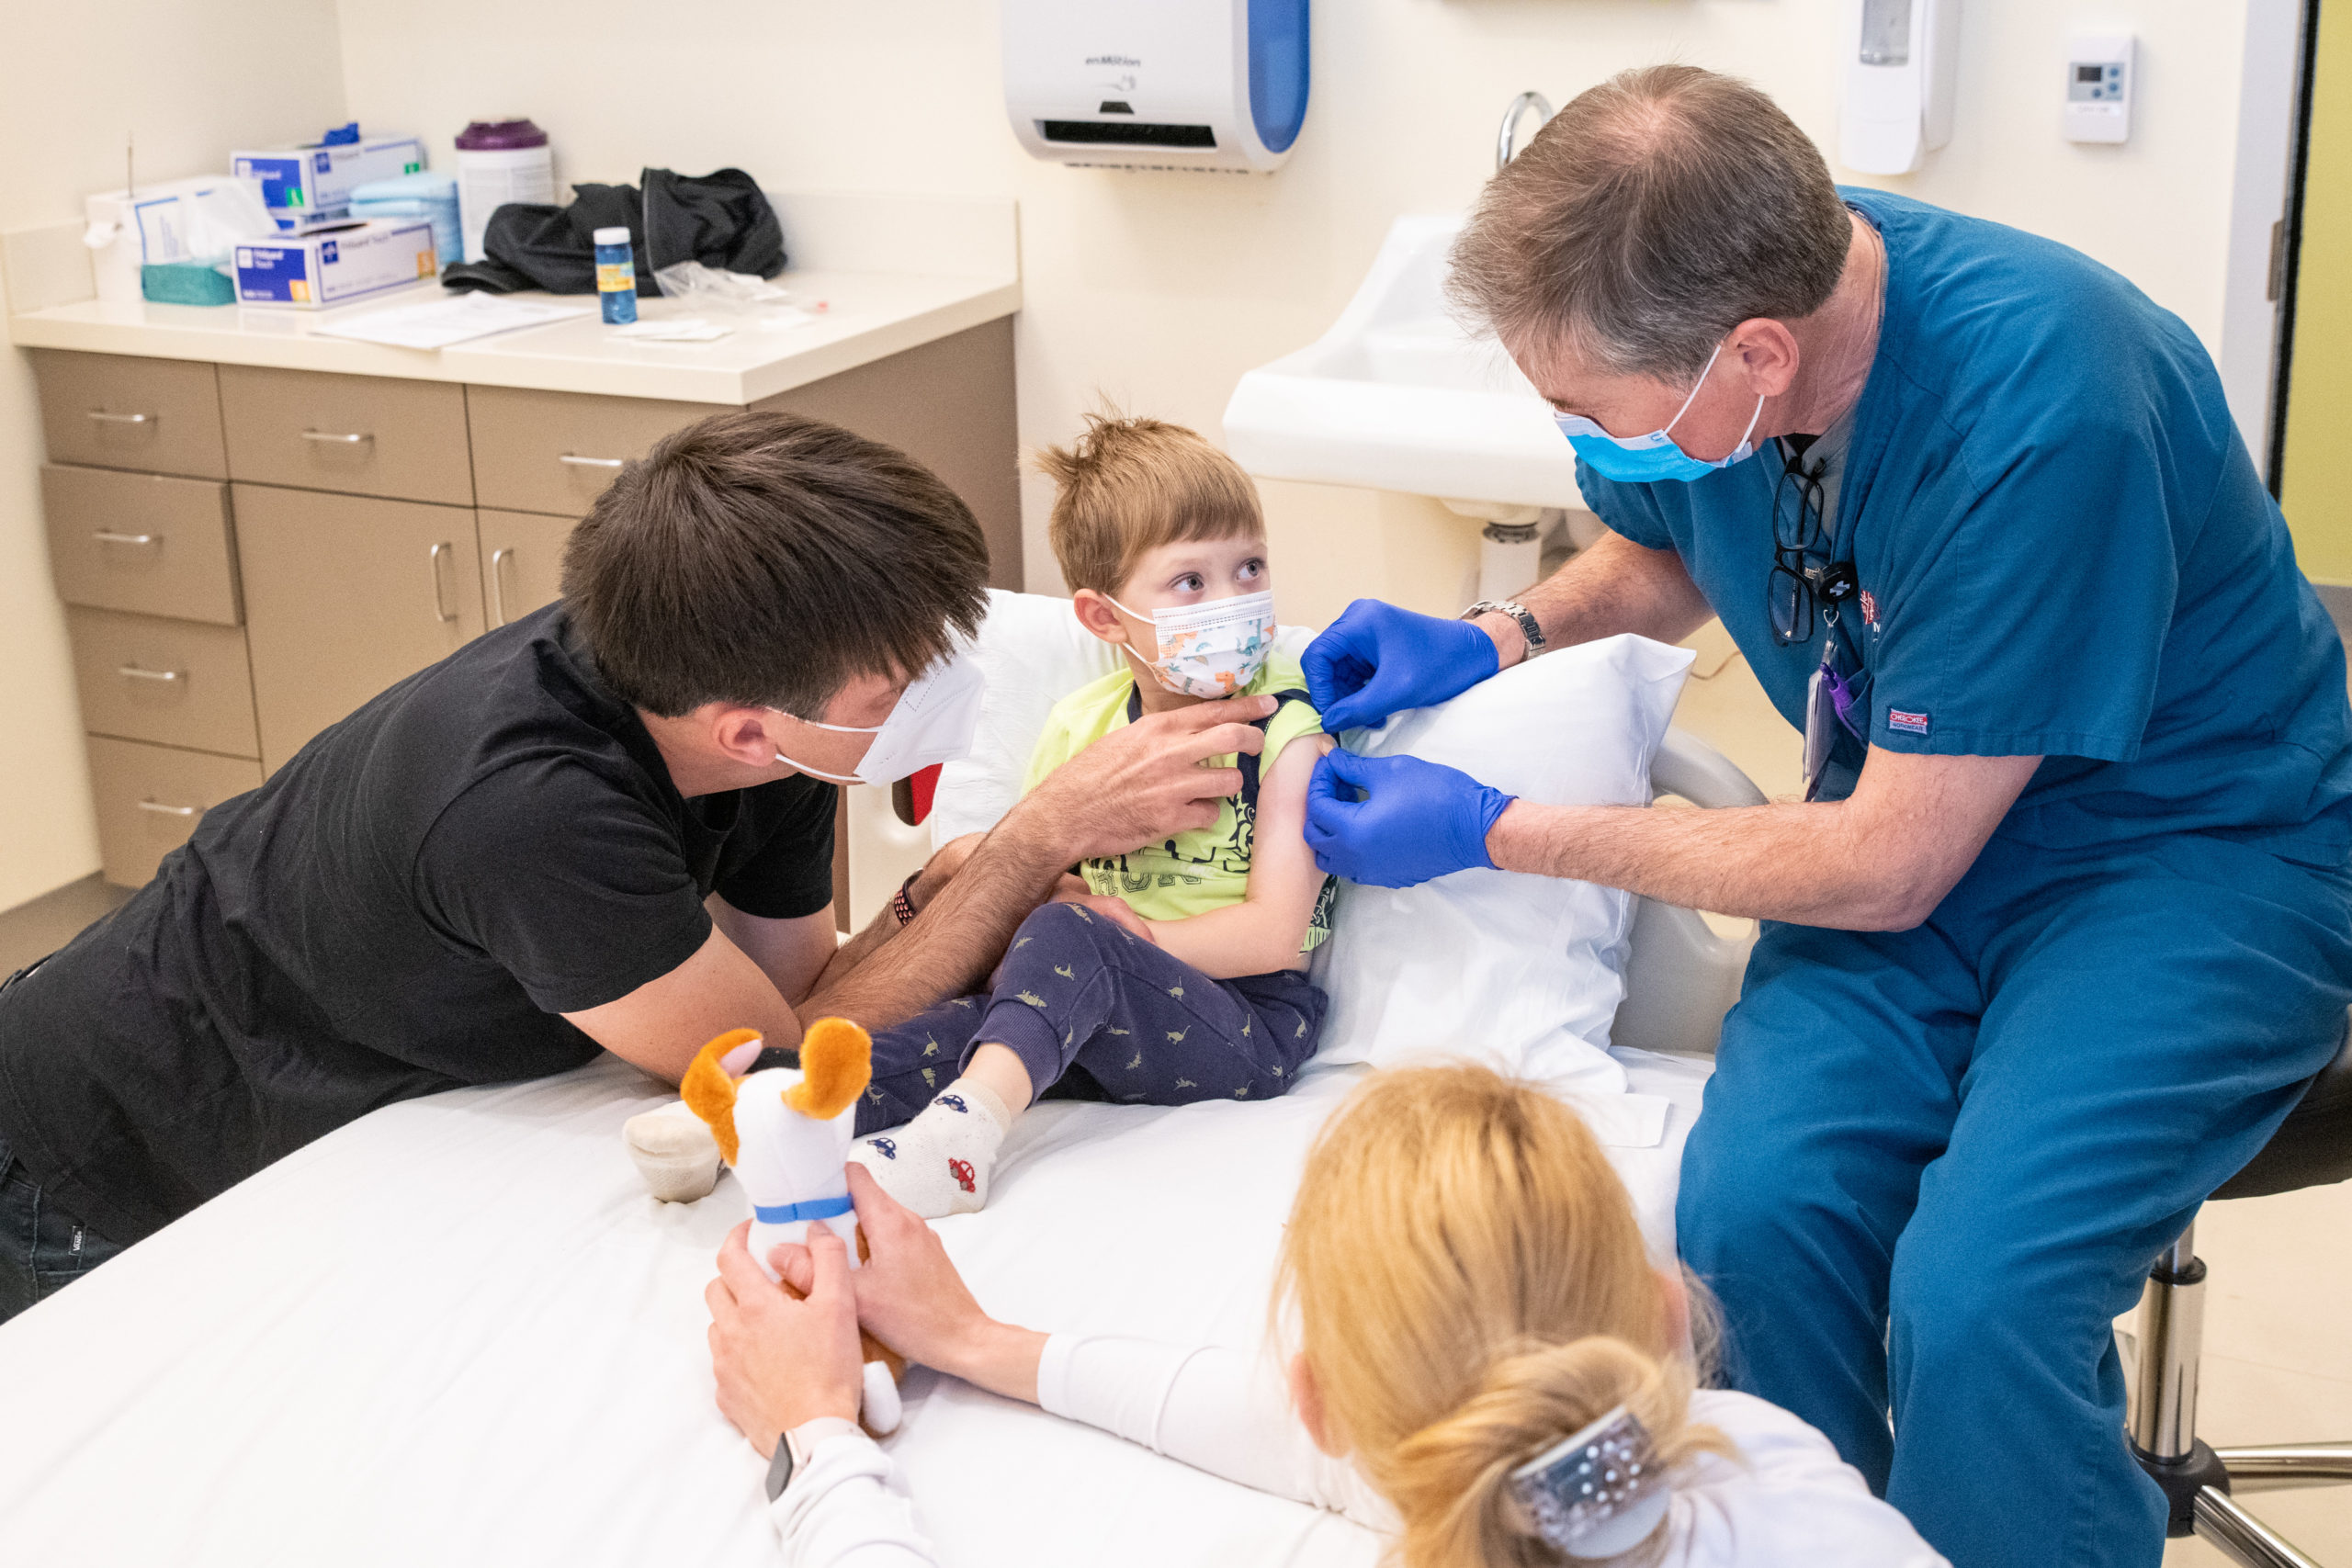 Stanford pediatricians helped conduct clinical trials of COVID-19 vaccines for children. Data from the study will be submitted to the Food and Drug Administration for consideration.